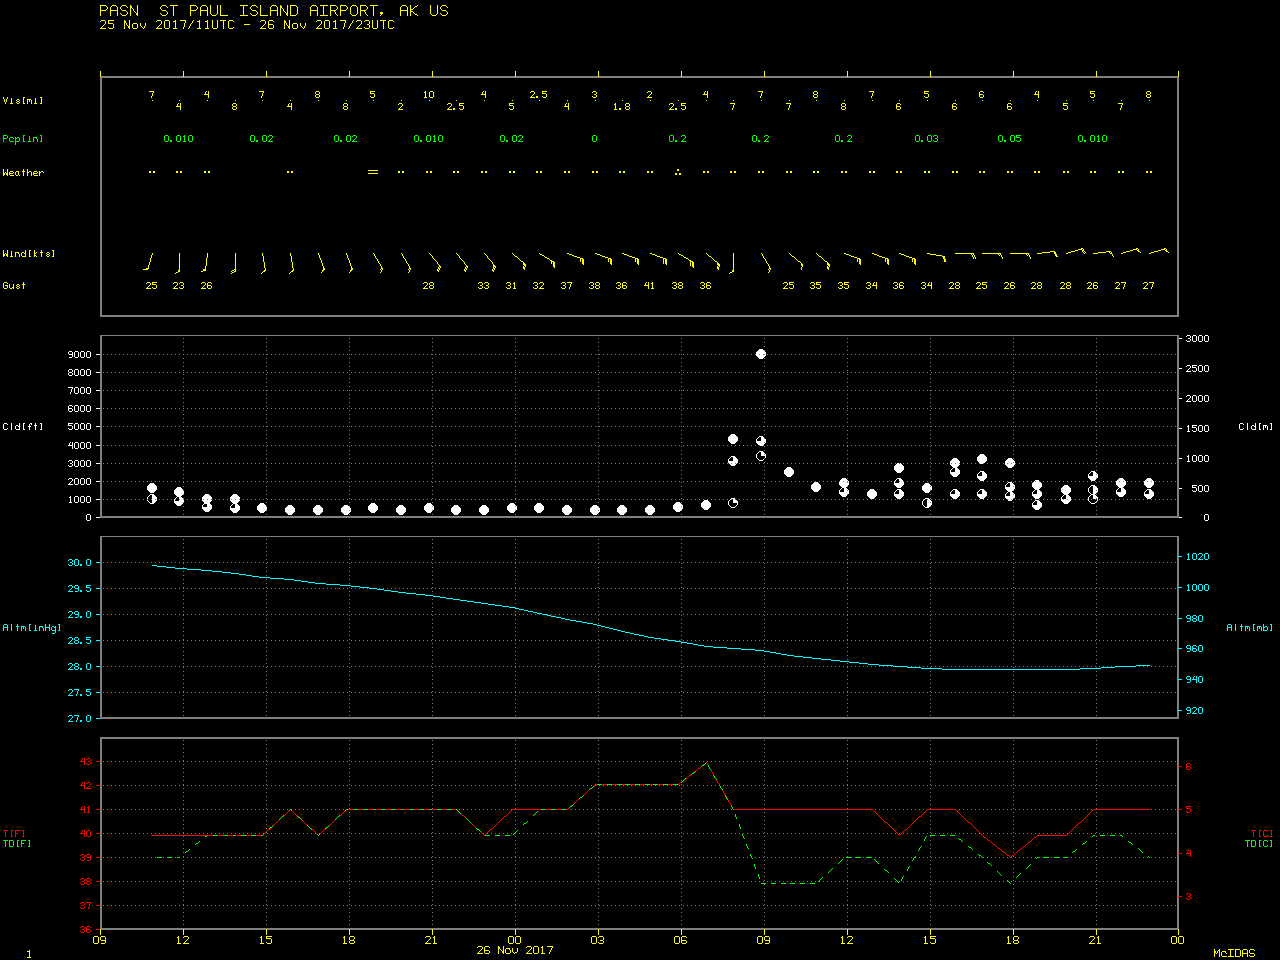 Time series of surface observations from St. Paul Island [click to enlarge]